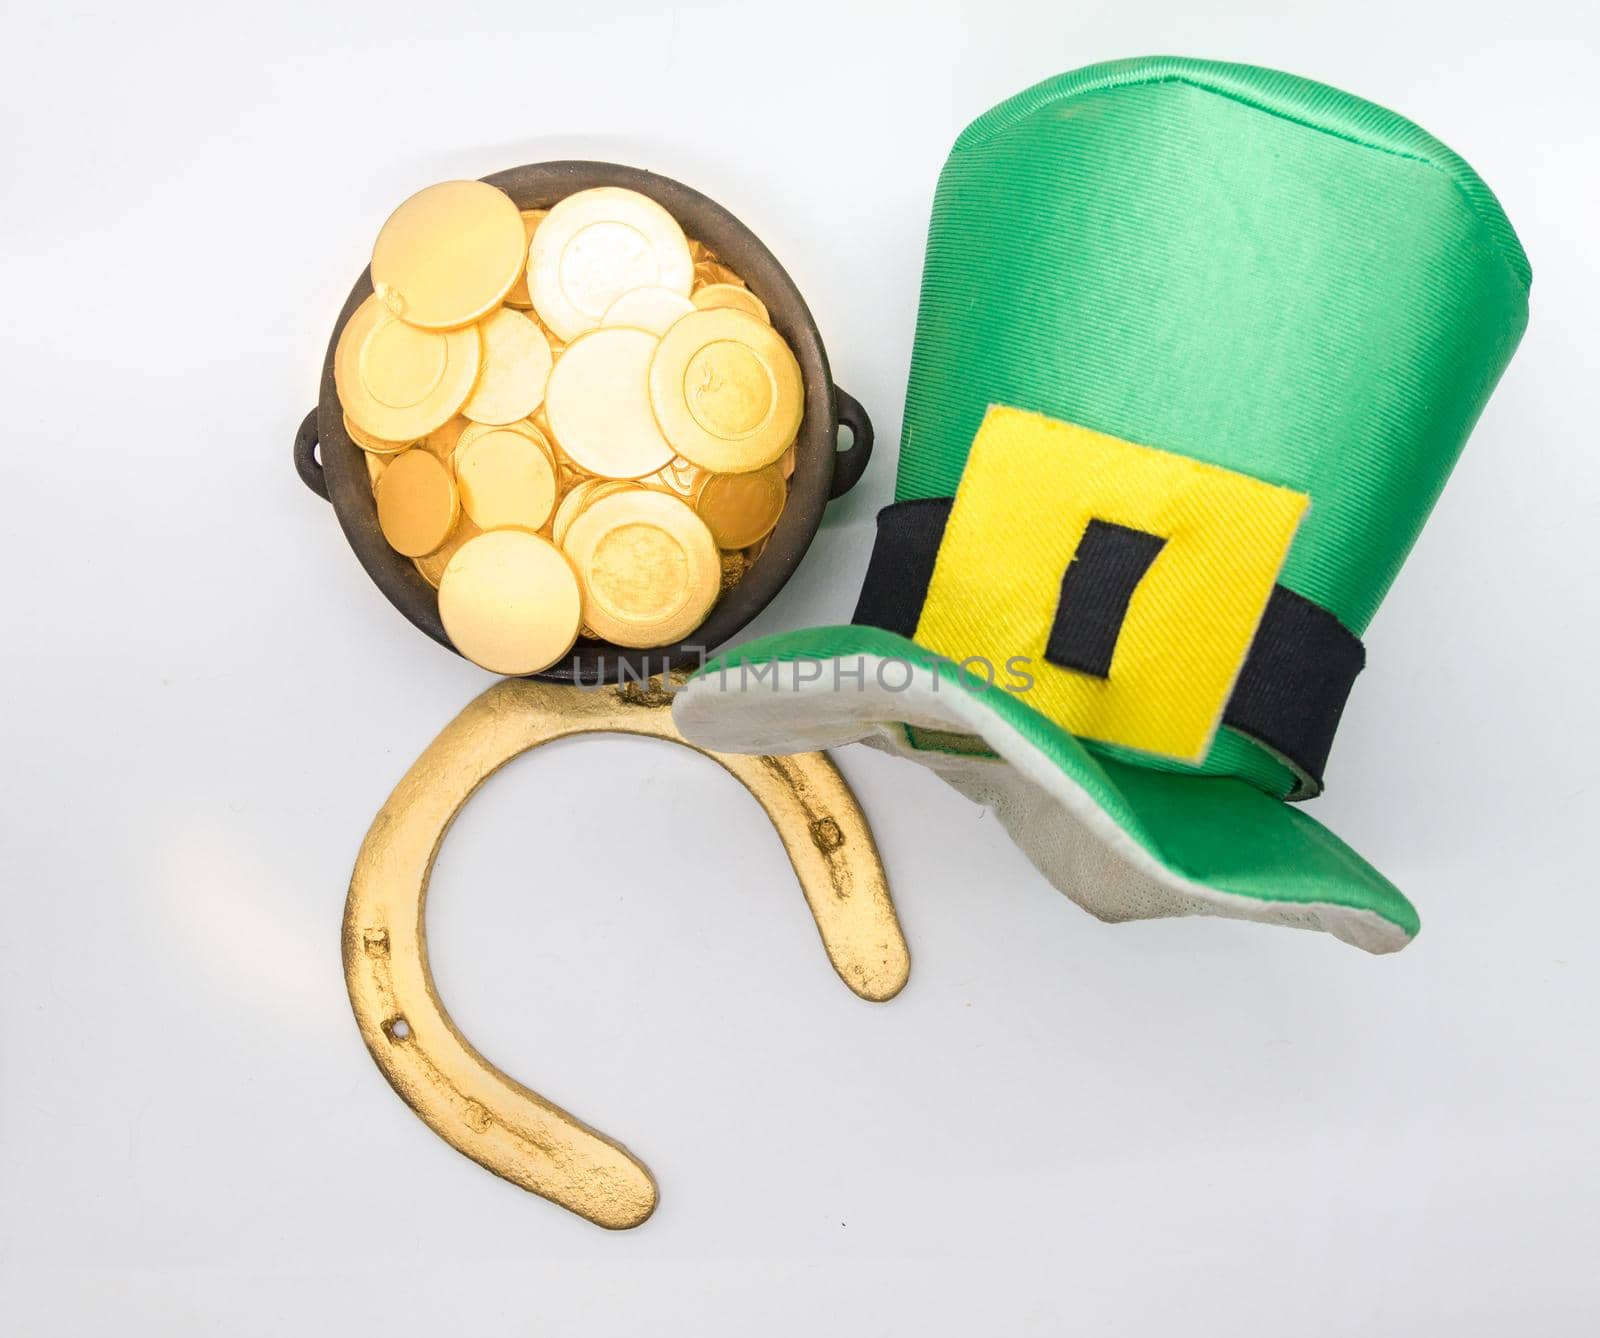 horseshoe galley and saint patrick's day coins